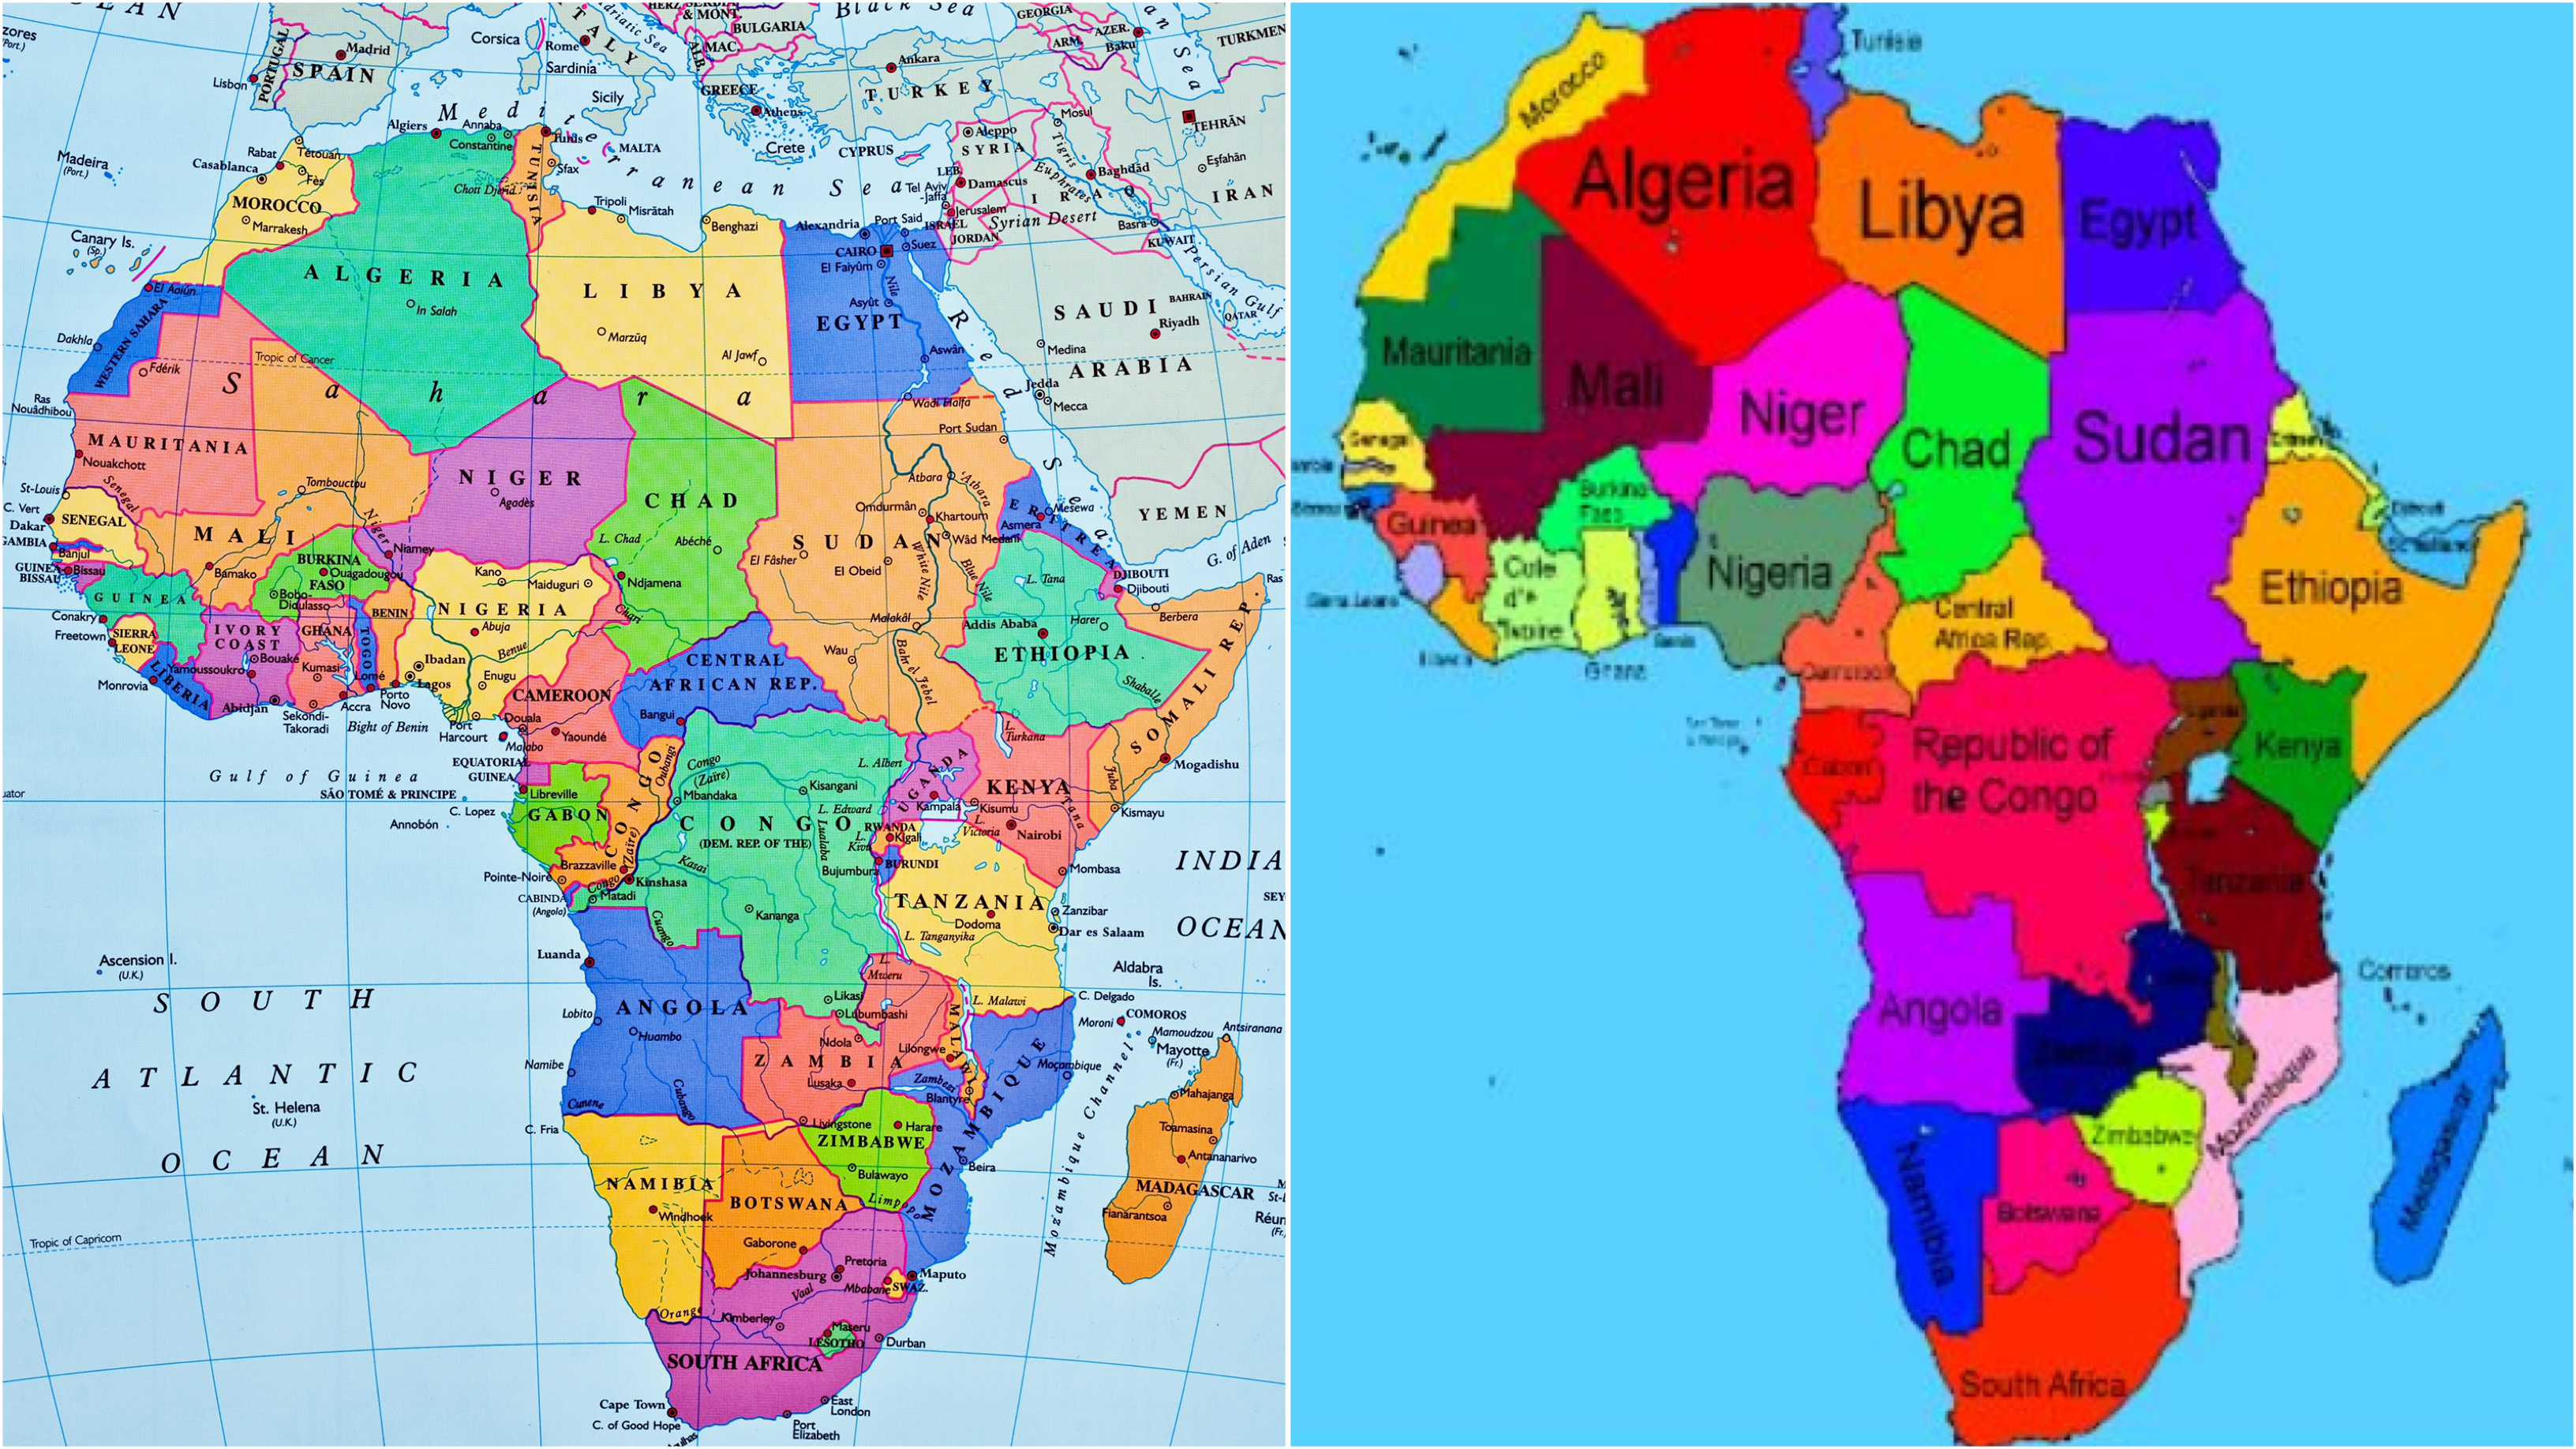 Africa news: Ethiopia foreign ministry apologise for map that excludes